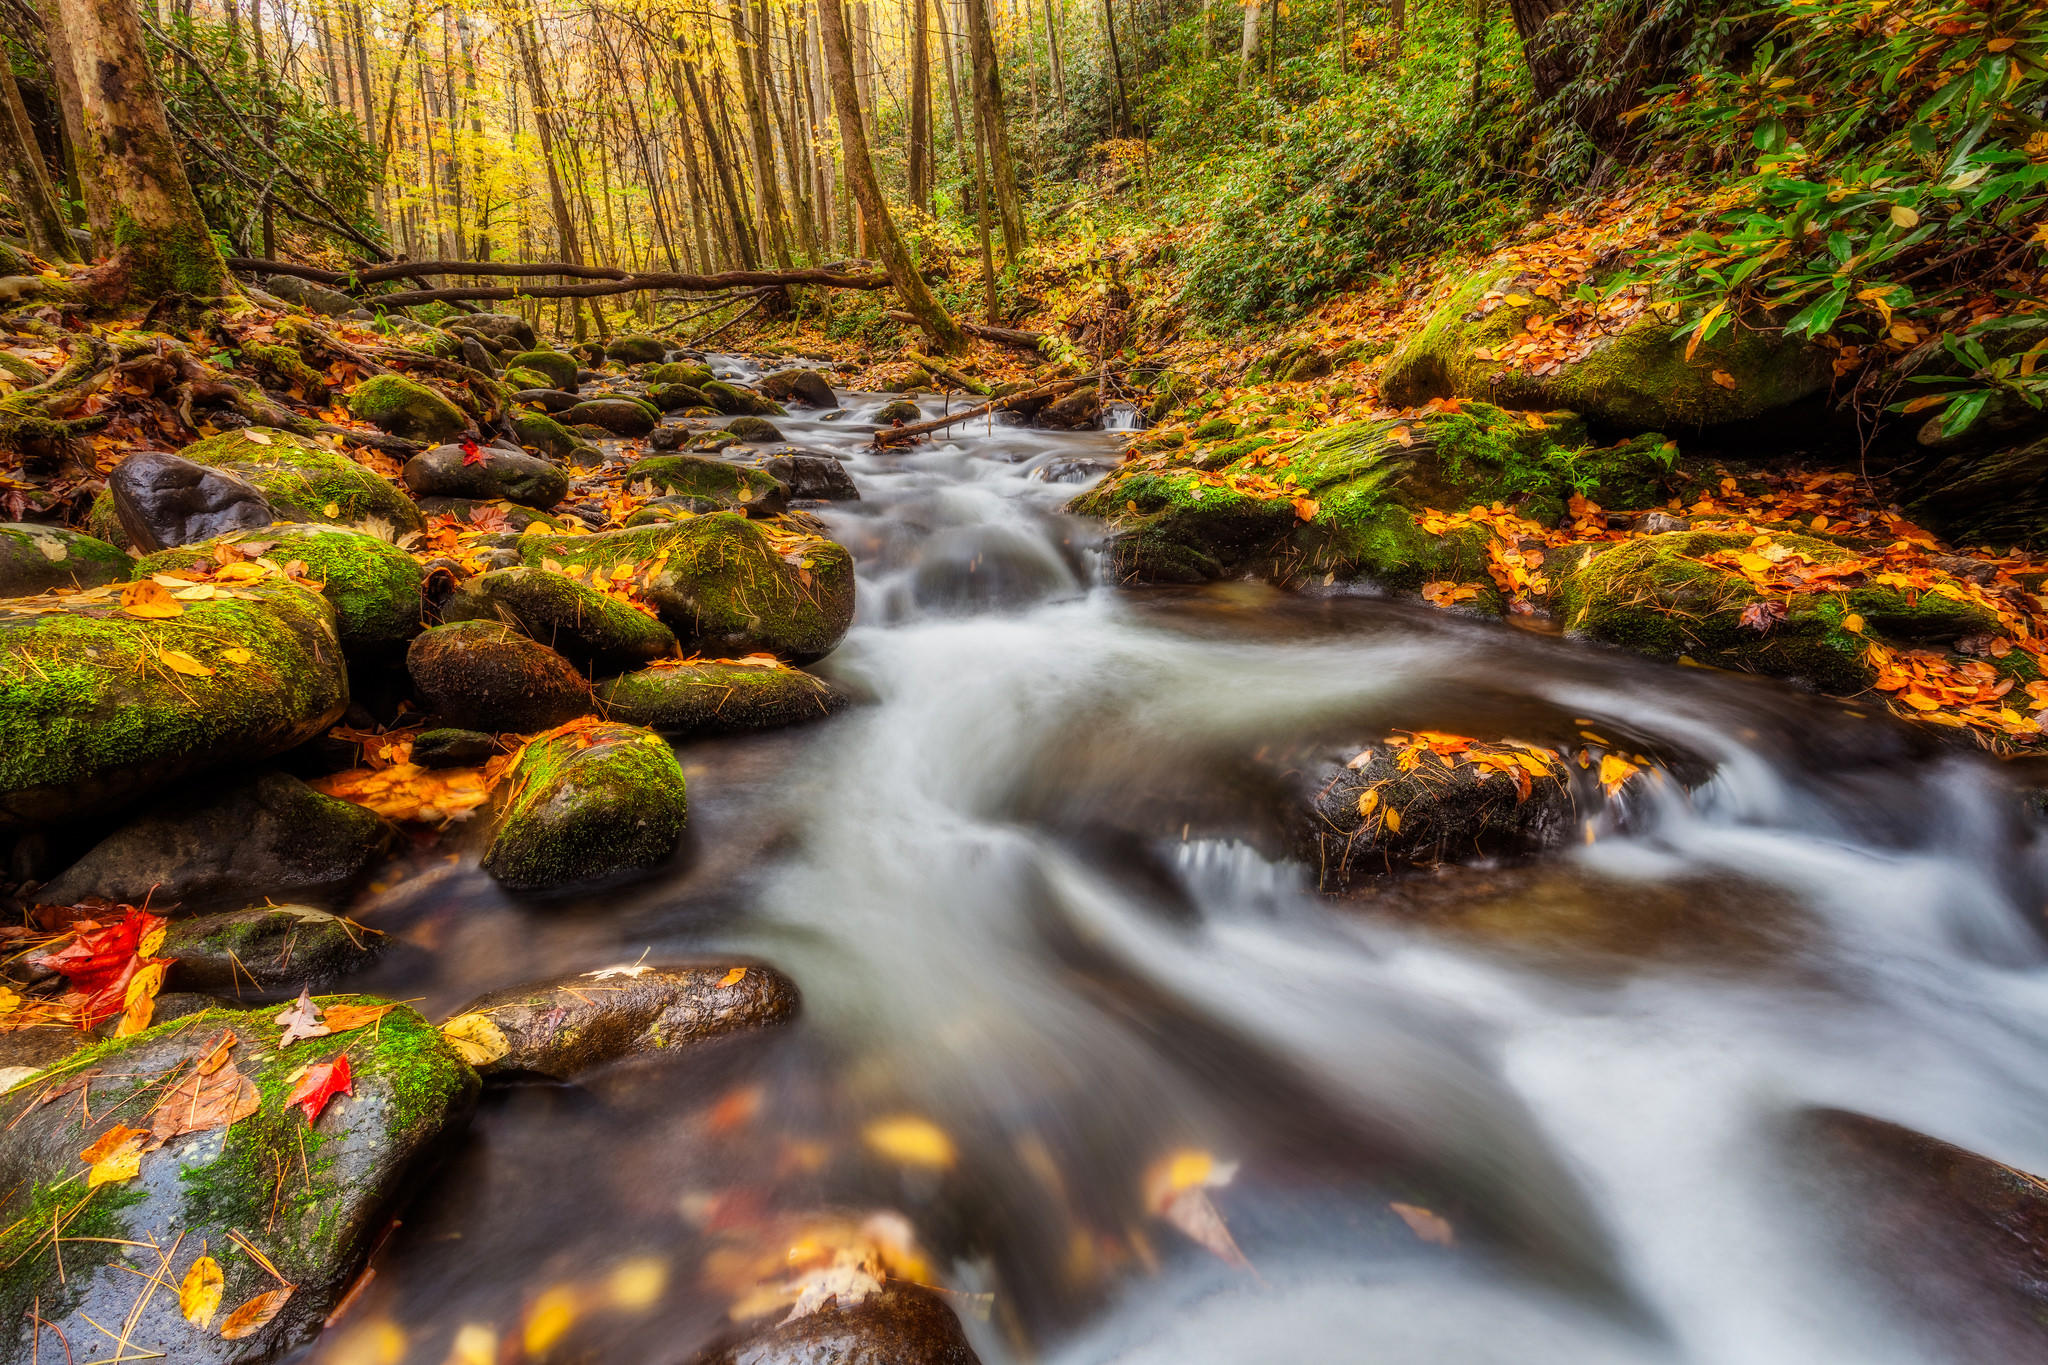 Download a free photo about autumn forest Smoky Mountains National Park. 